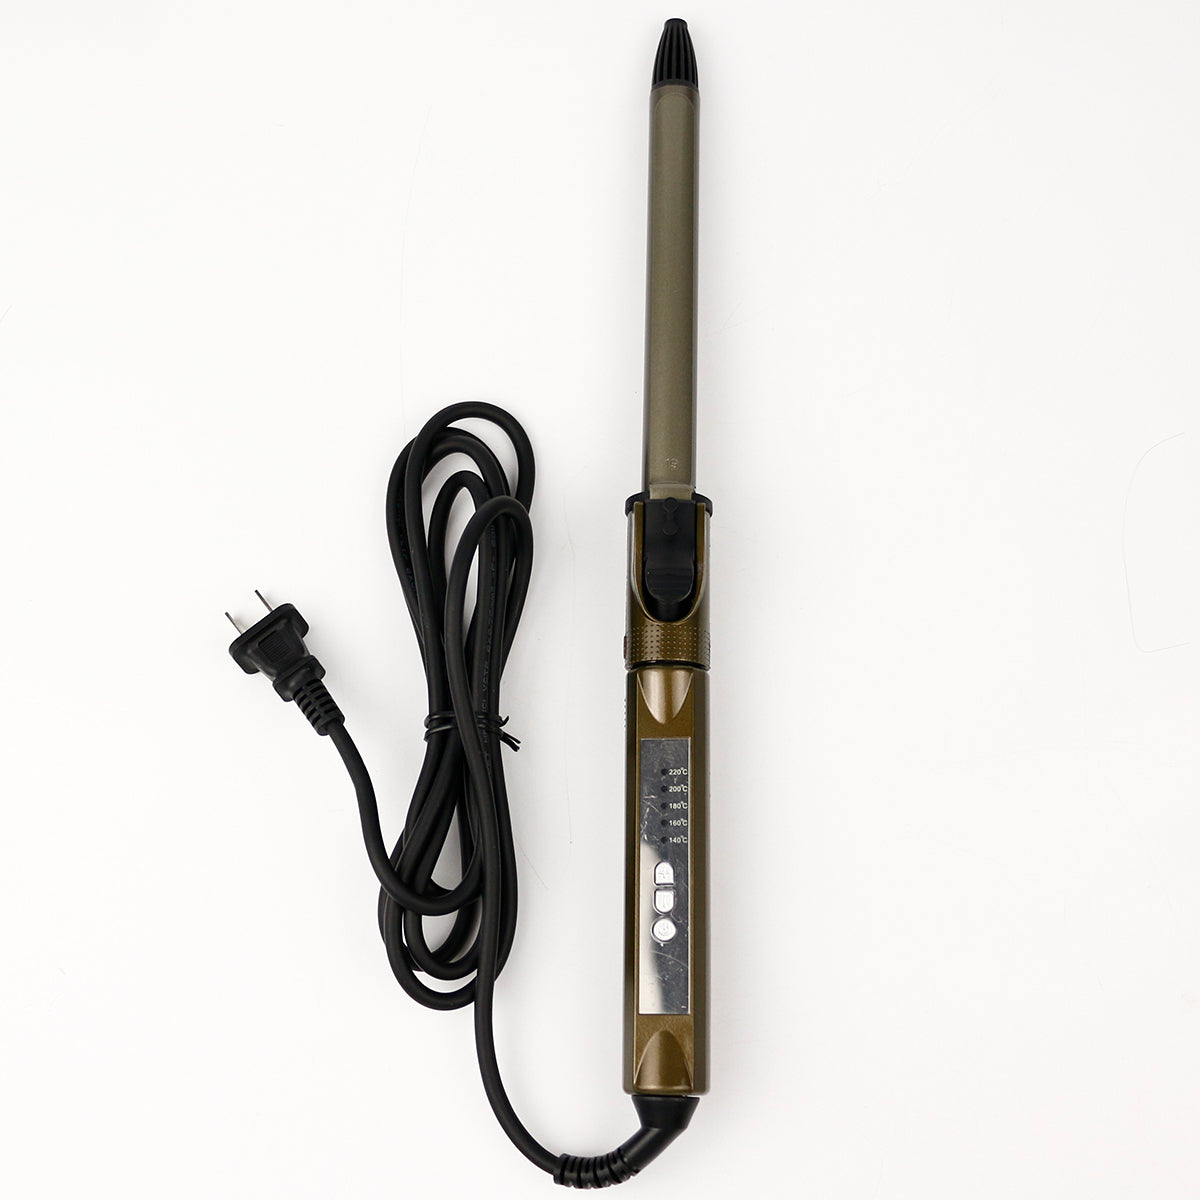 Professional Series Curling Iron - 3